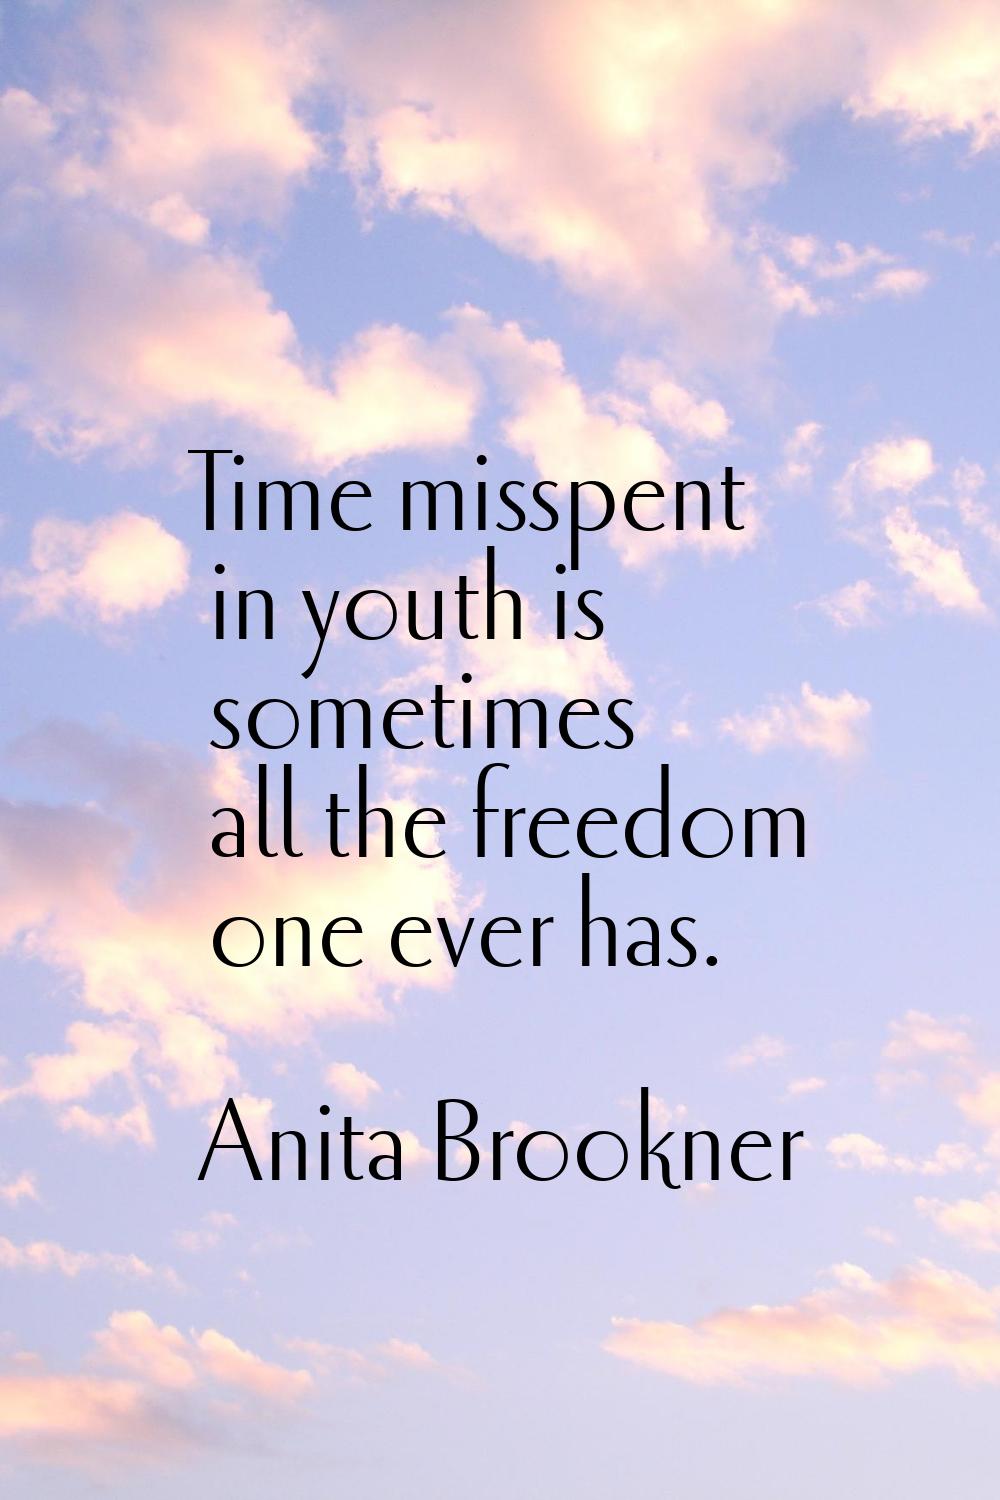 Time misspent in youth is sometimes all the freedom one ever has.